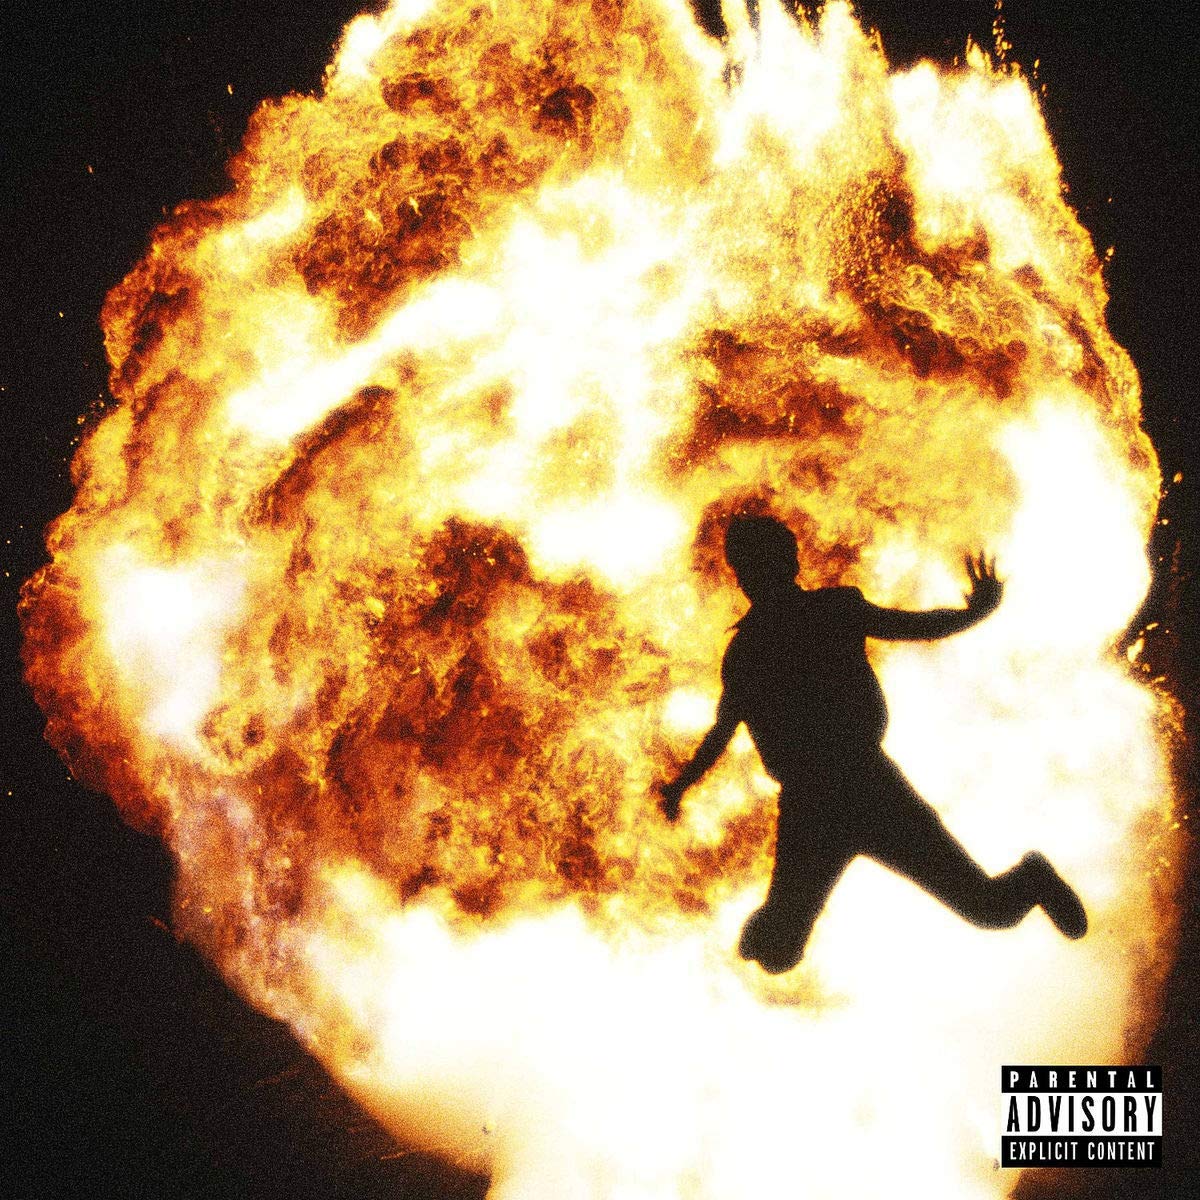 CD Shop - METRO BOOMIN NOT ALL HEROES WEAR CAPES